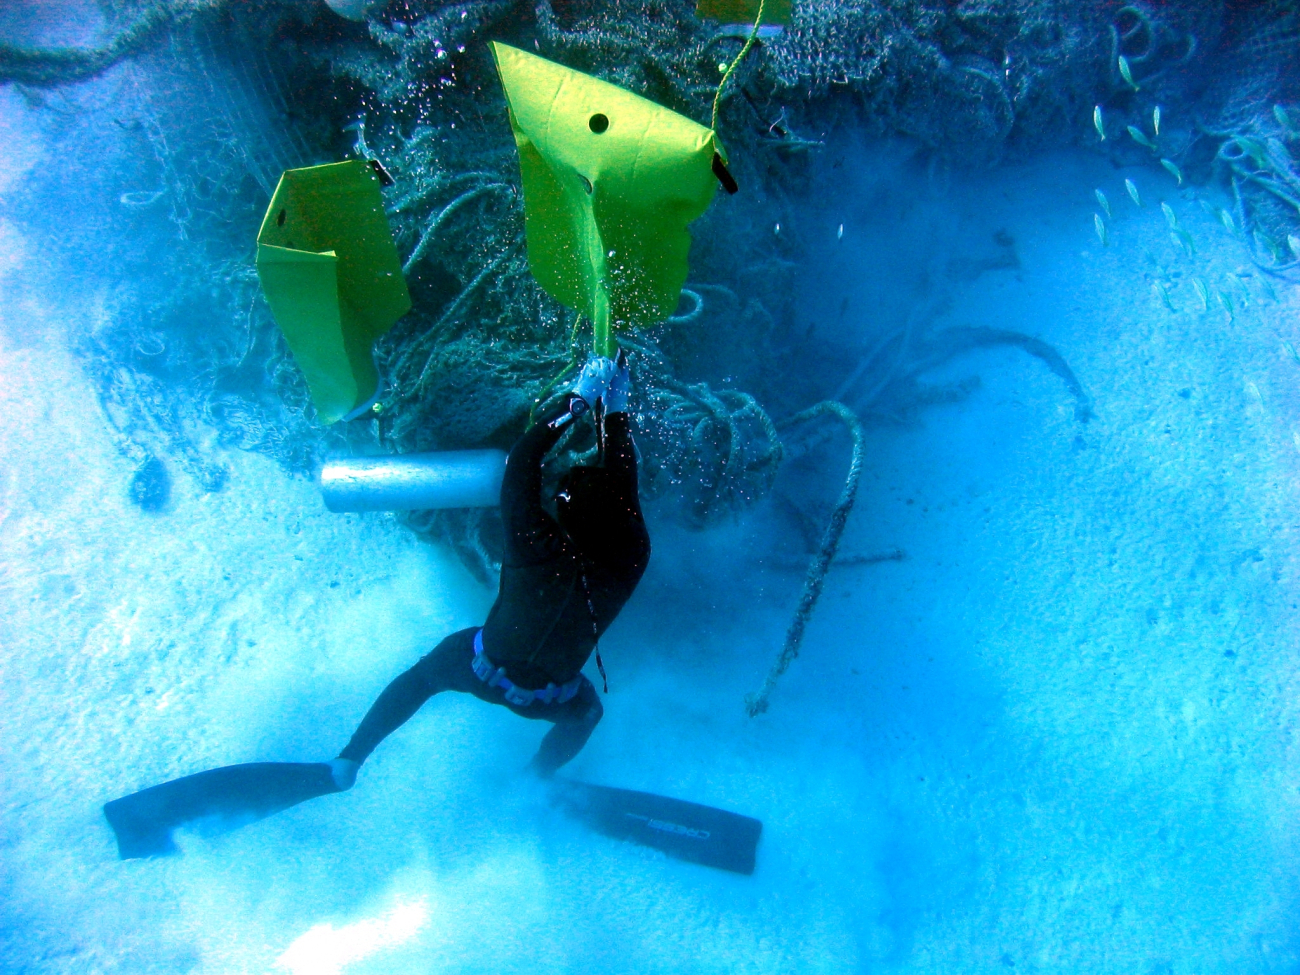 Filling lift bags on agglomeration of nets from image reef3038